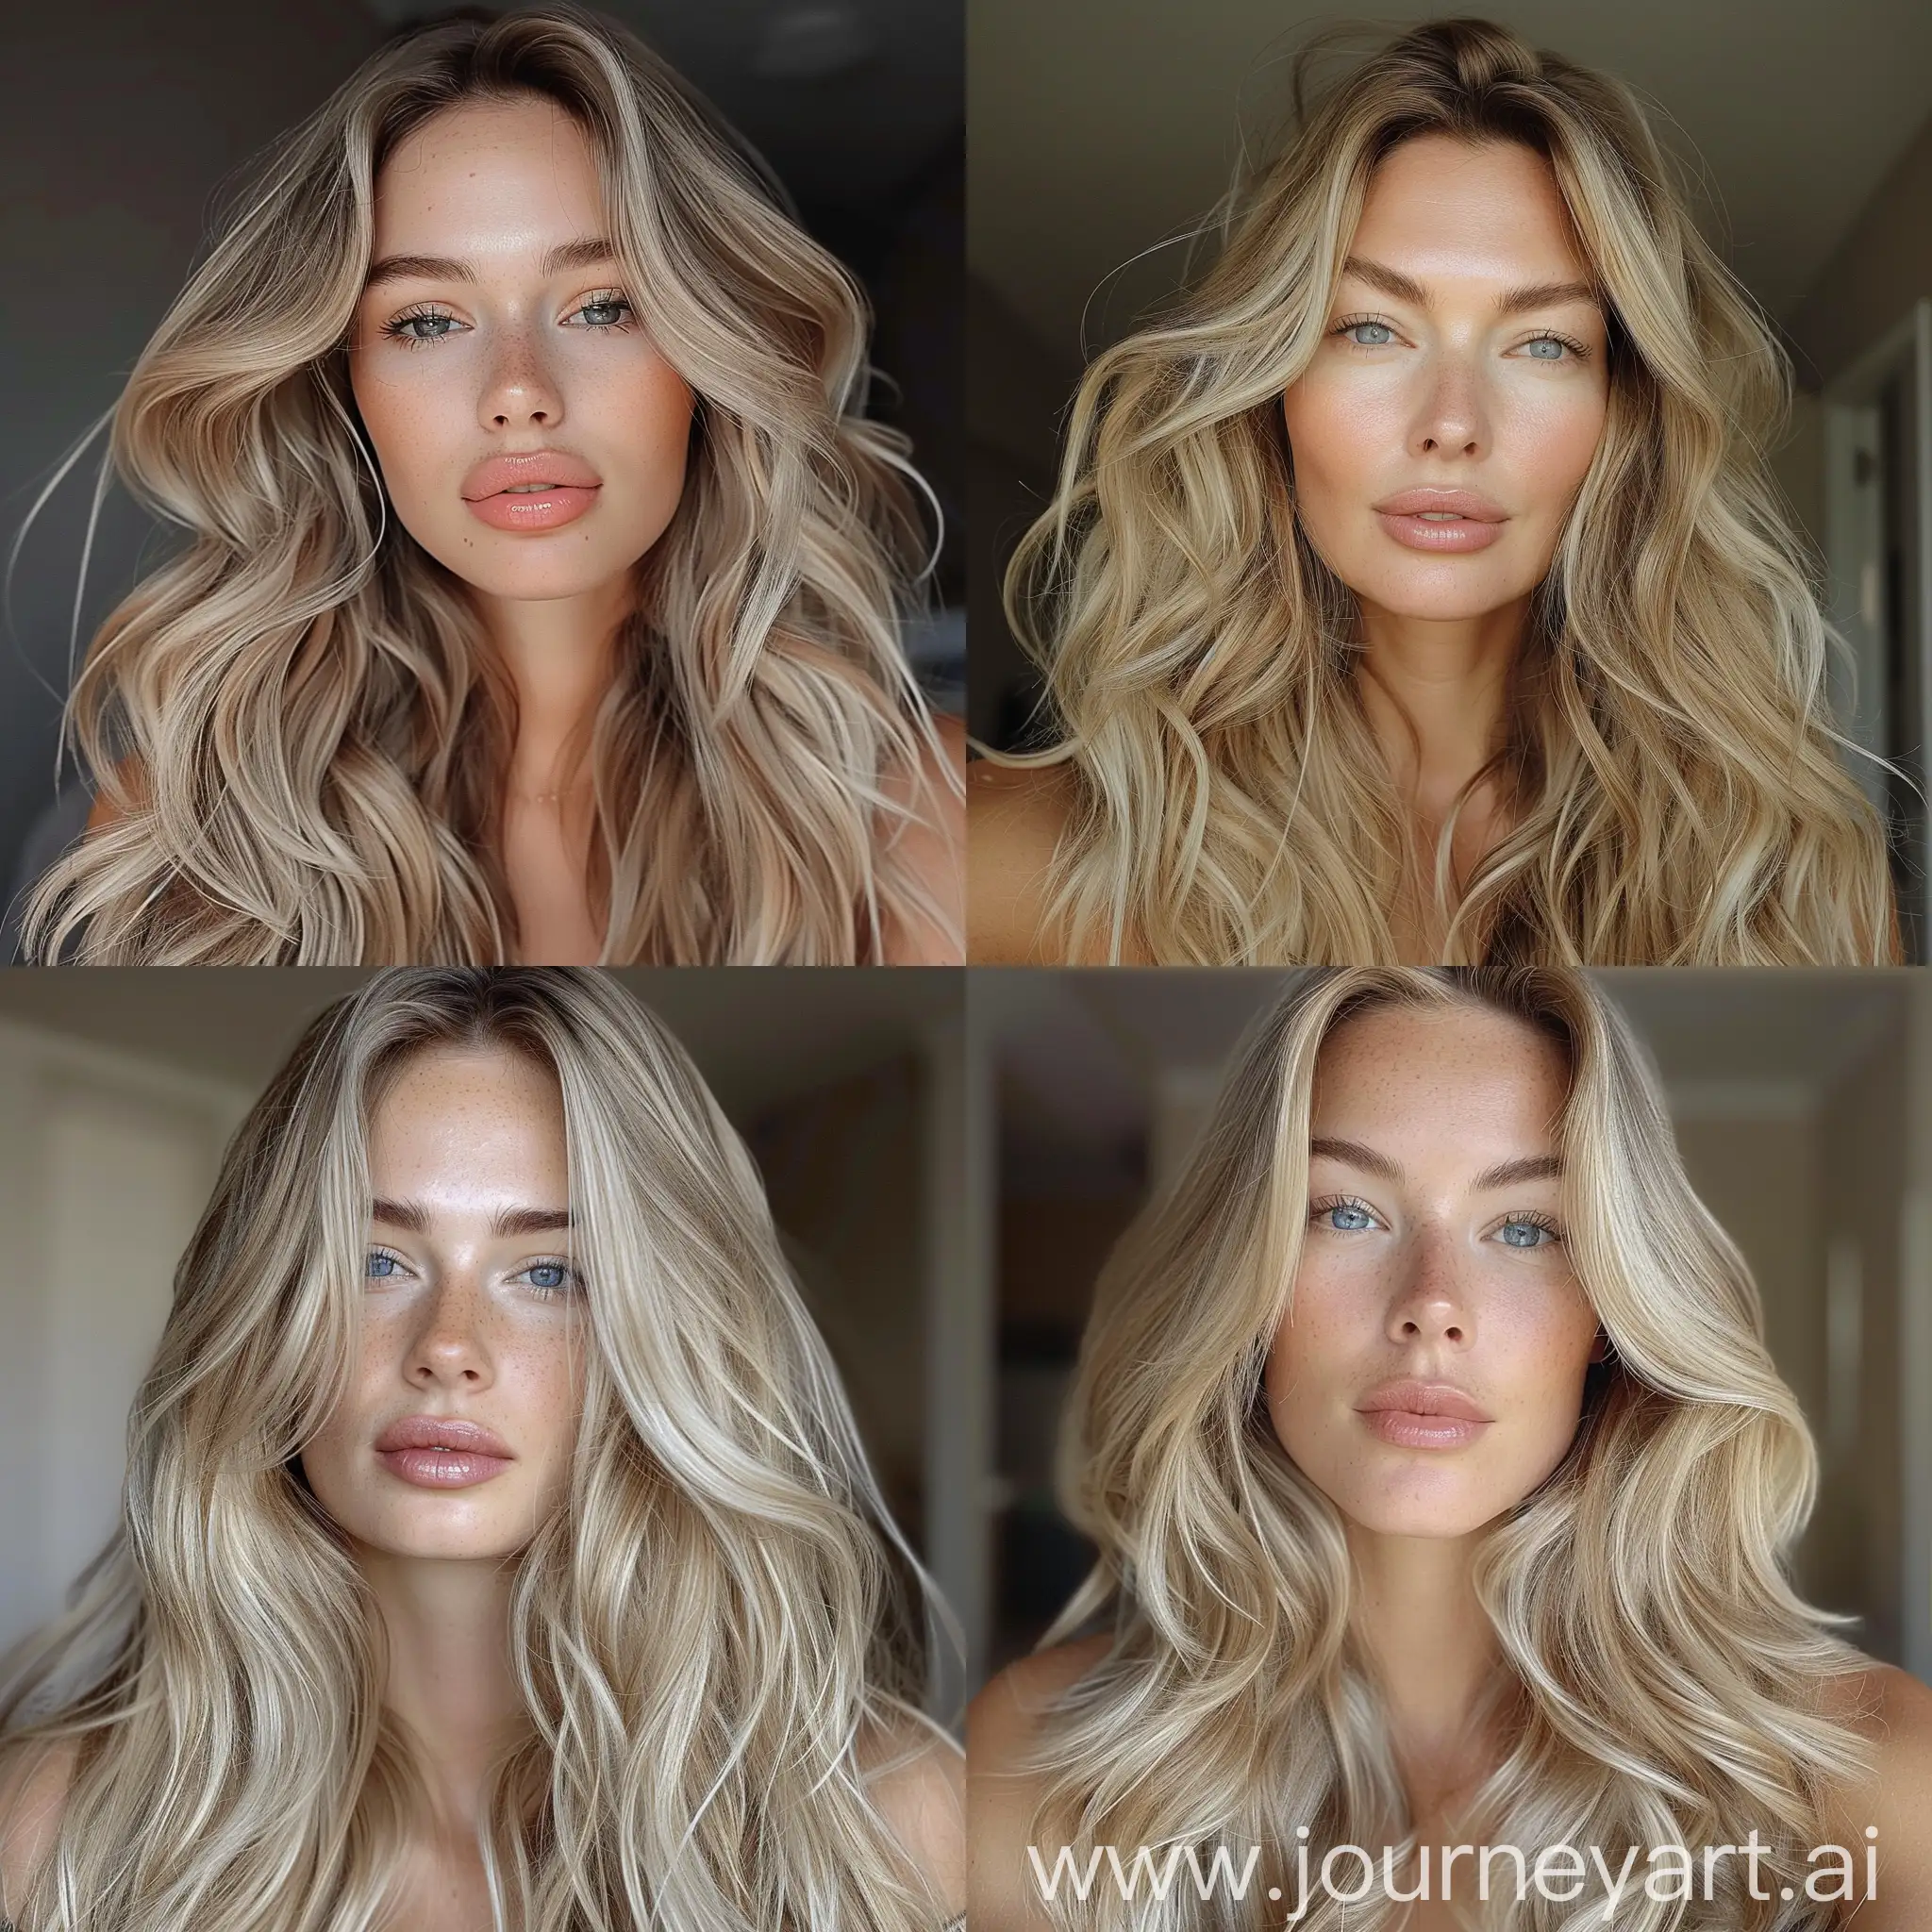 The woman in the photo has long hair, styled back in waves, she is blonde. The hair does not cover her face. Her complexion is light, her face is perfectly clean.  She has a round face with full lips and almond-shaped blue eyes. She looks straight into the camera, Enfance, her face is clearly visible. Her hair does not cover her face. The lighting in the room is dim, making it difficult to see anything else about her appearance. Selfie taken on iPhone, for Instagram 2019--v 6.0 --style raw --s 150 --v 6.0